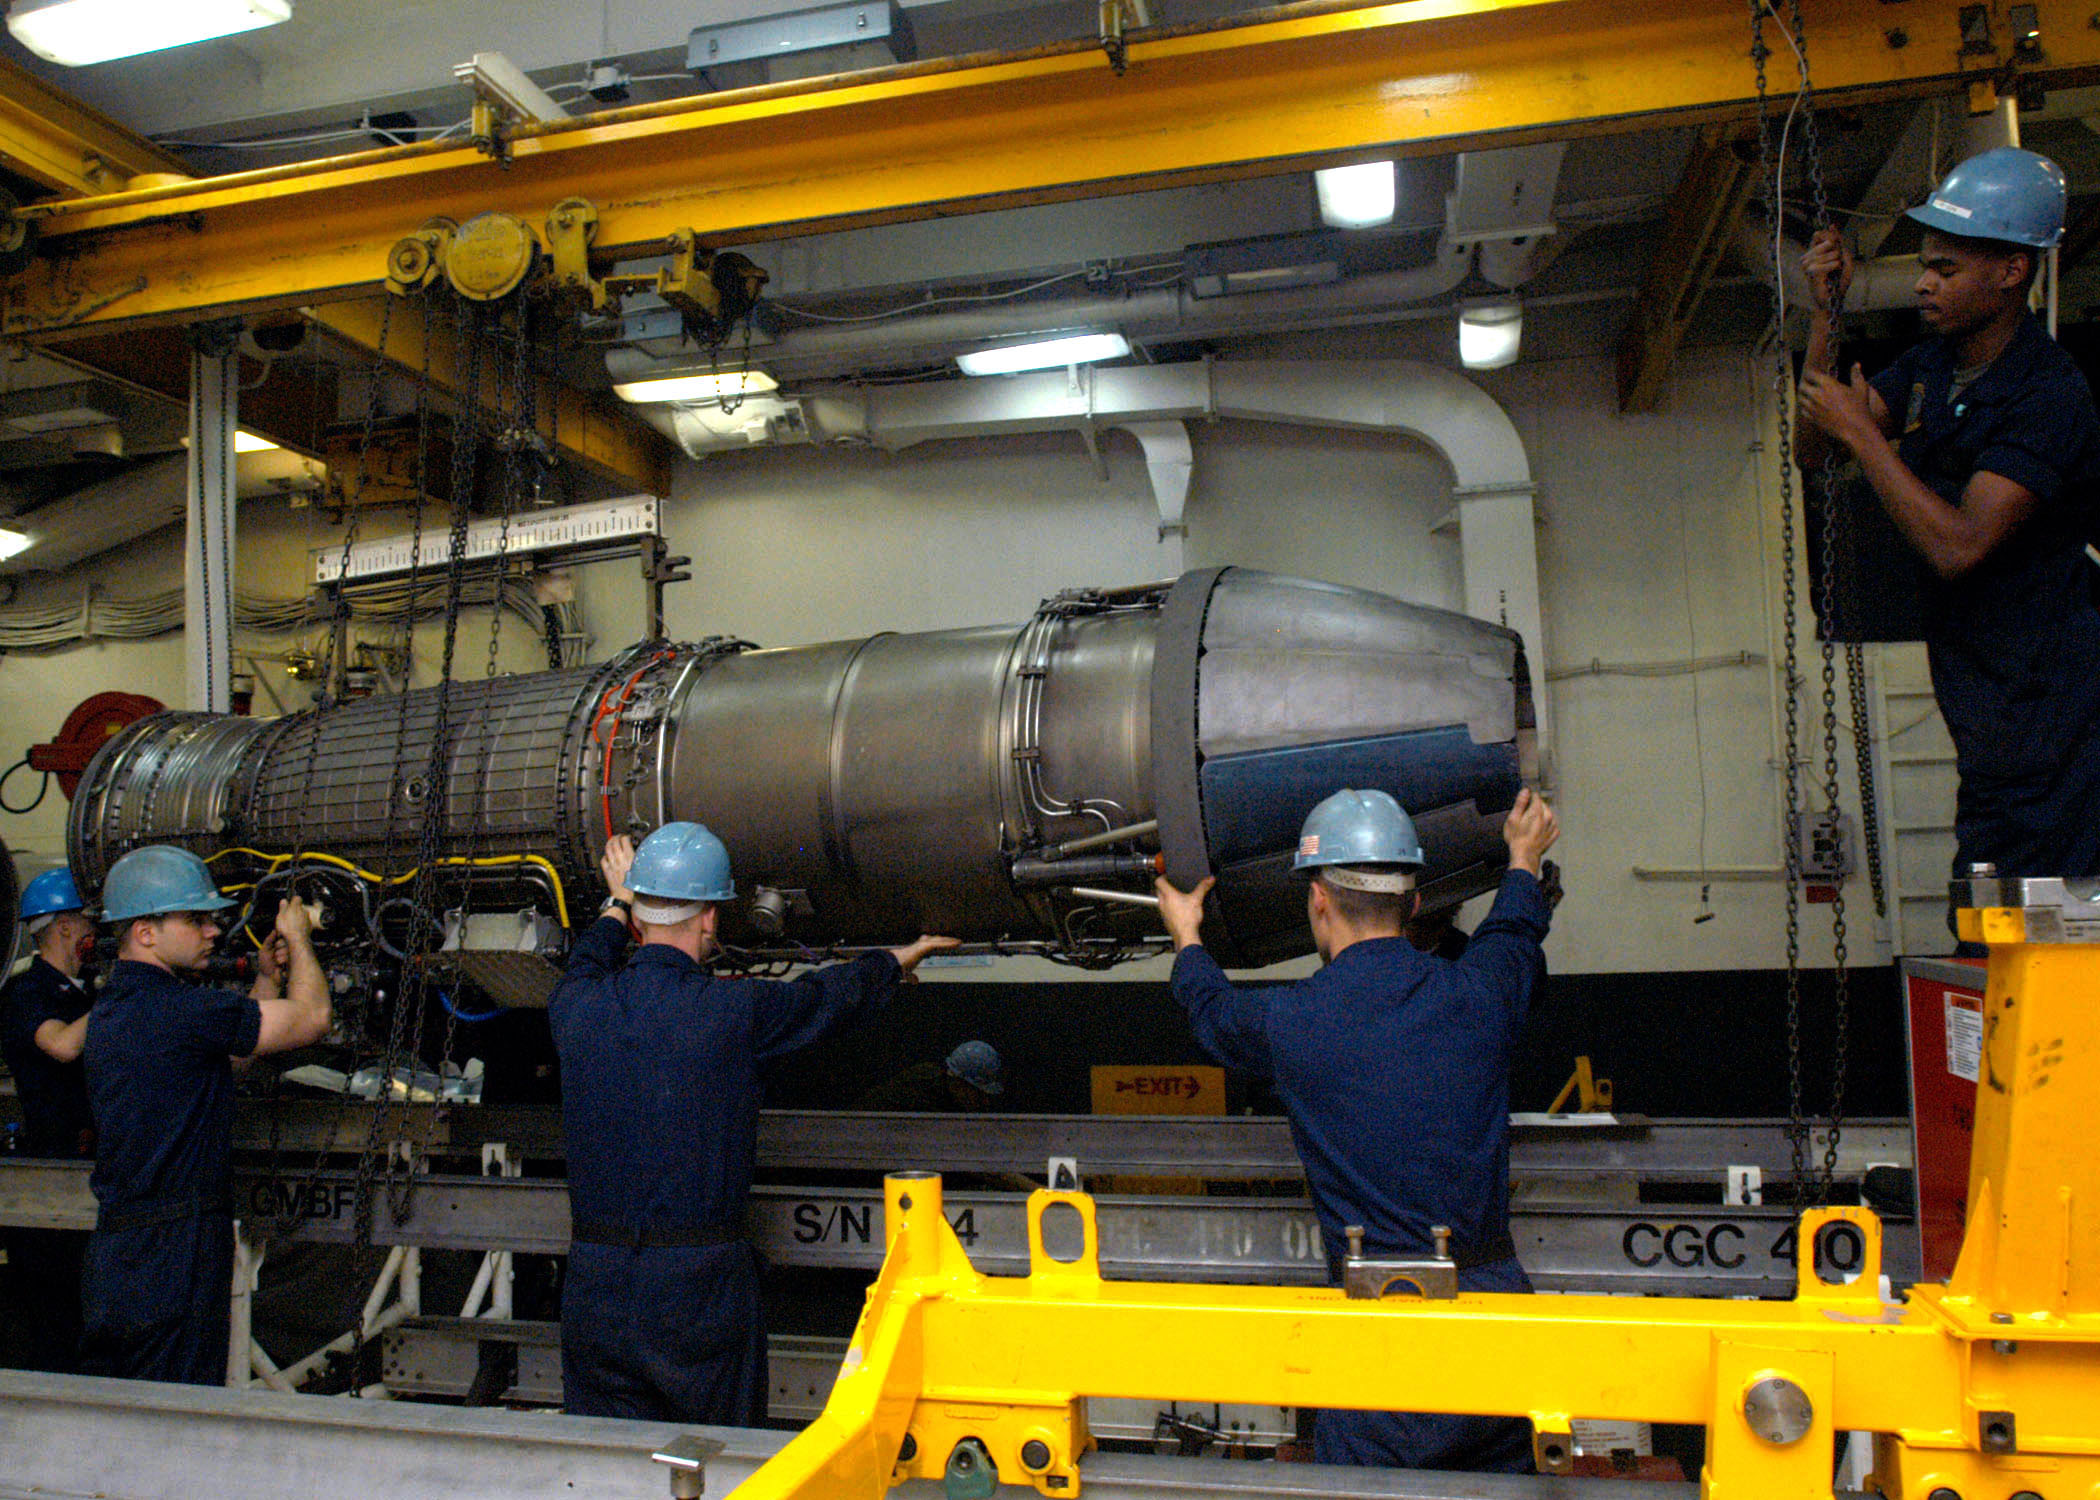 US Navy 040104-N-7278A-003 Personnel from the Aircraft Intermediate Maintenance Department (AIMD) prepare to place a jet engine onto an installation trailer aboard USS Enterprise (CVN 65)